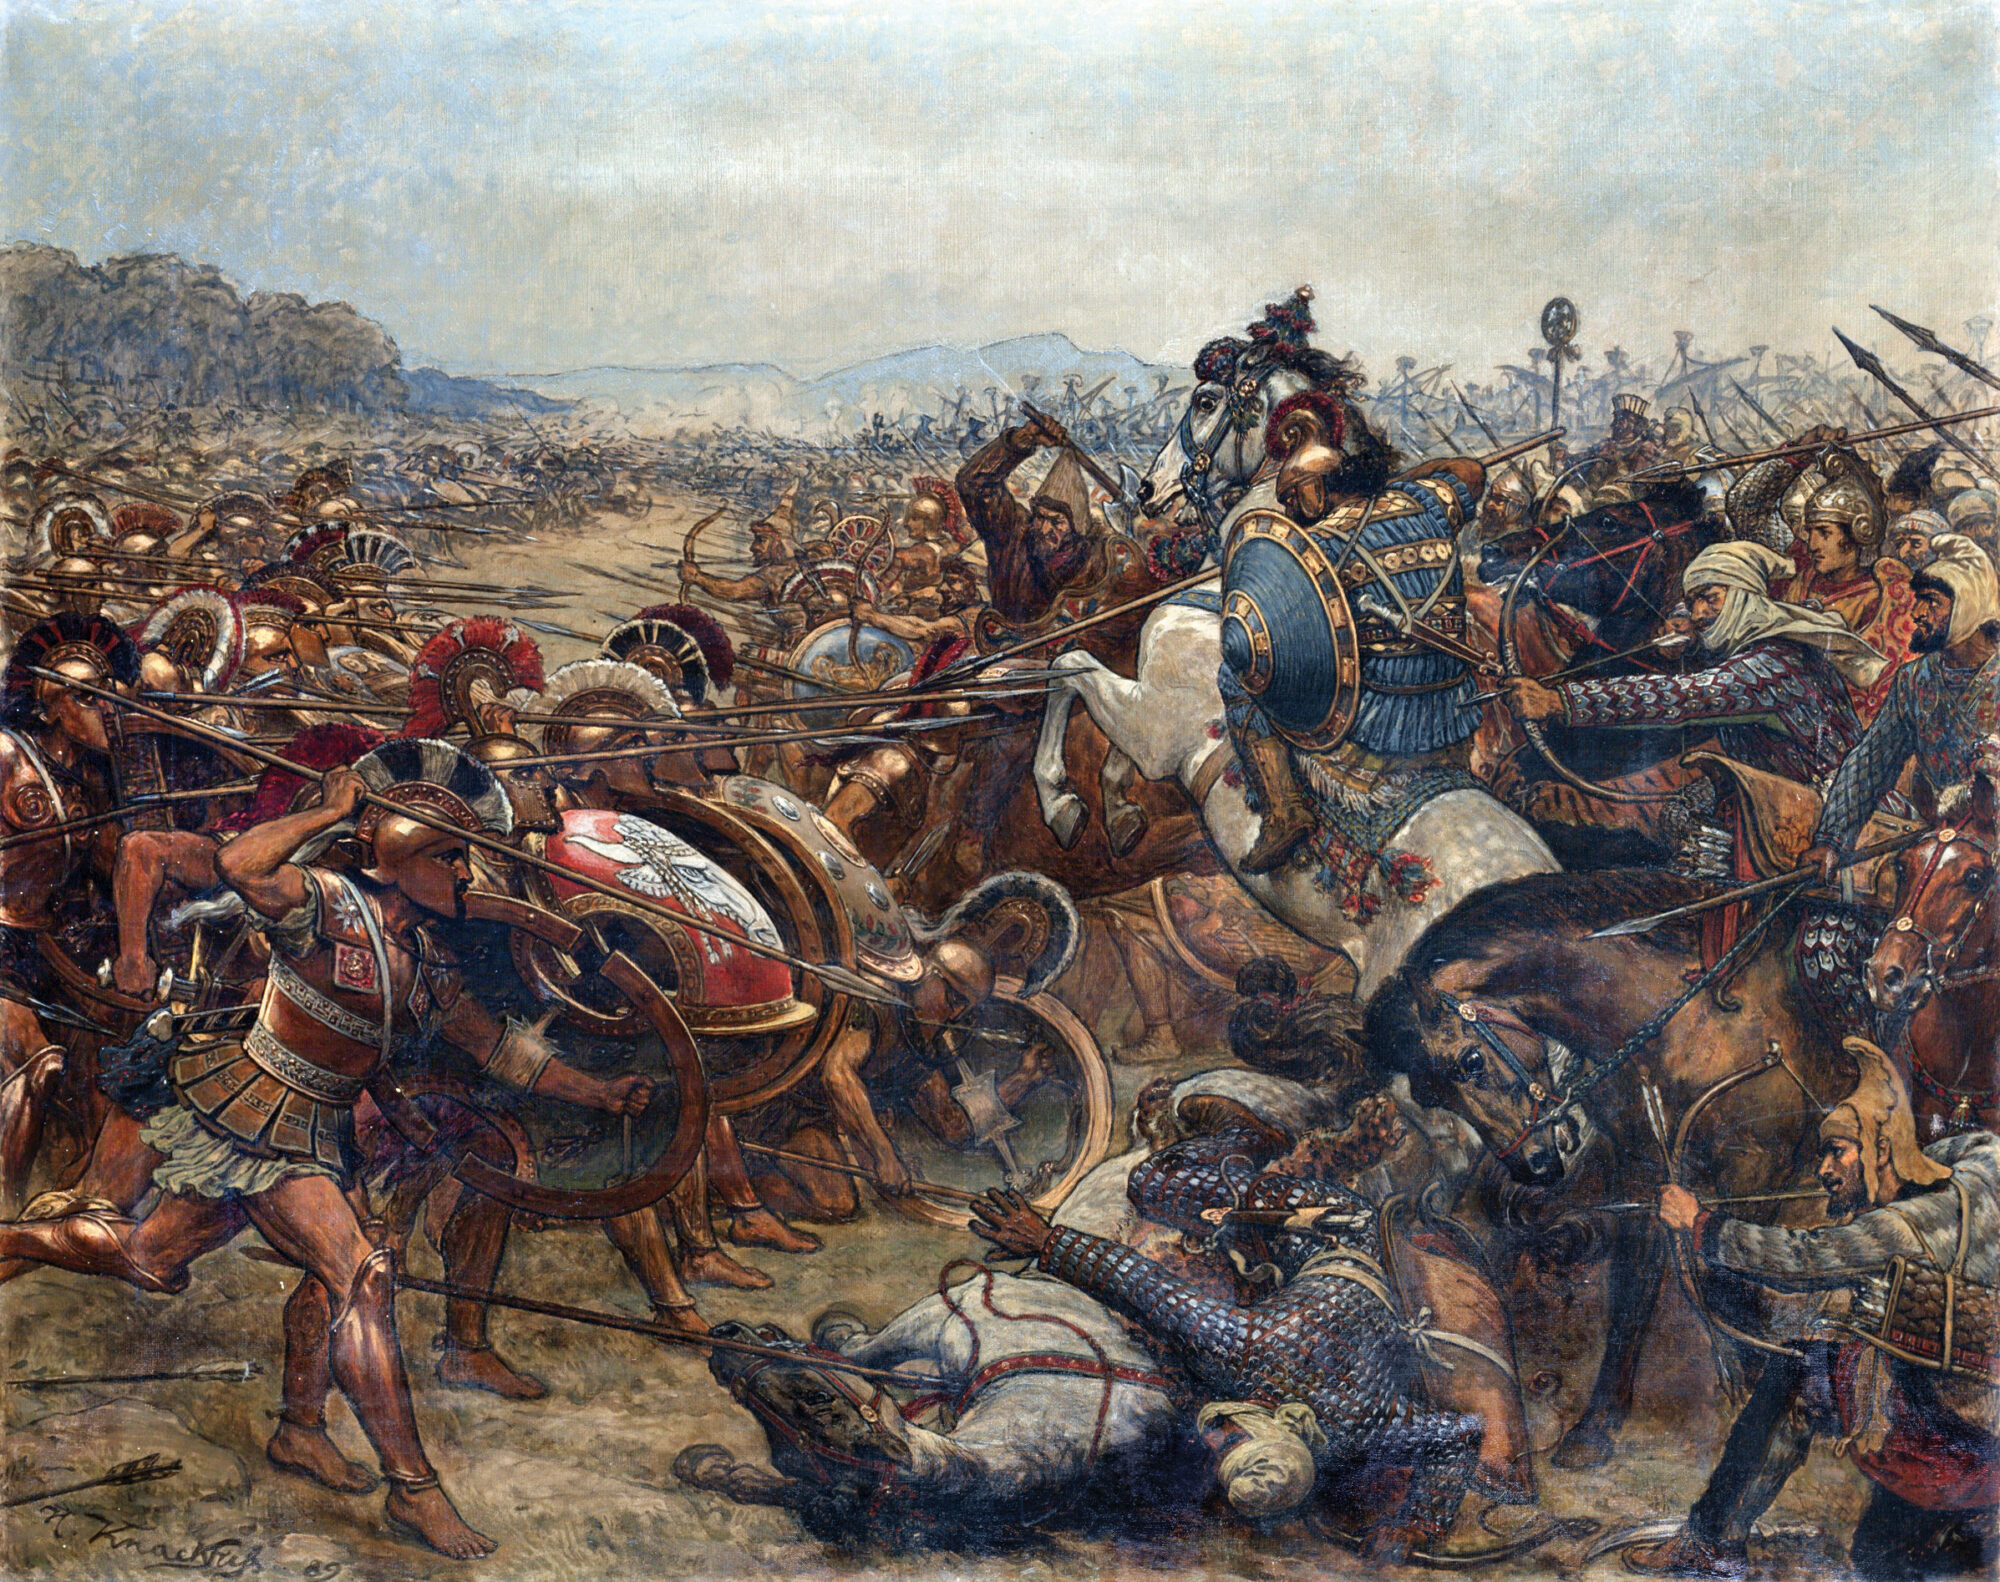 Greek hoplites armed with large shields and iron-tipped spears charge the Persians at Marathon.